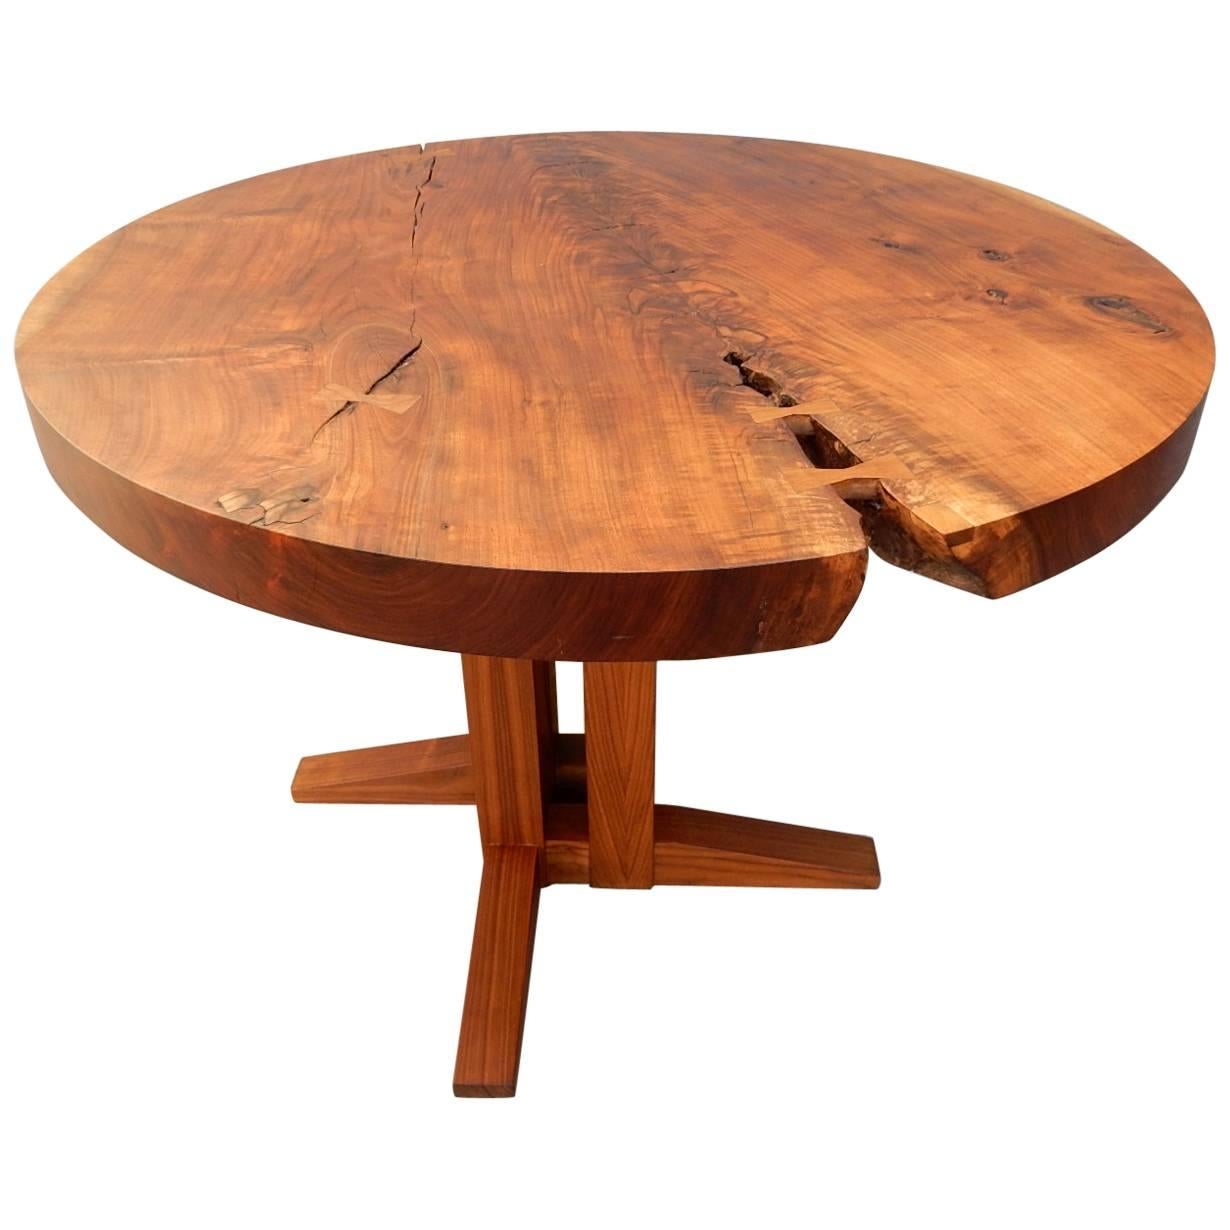 Nakashima Style Sculptural Walnut Slab Table By Actor Nick